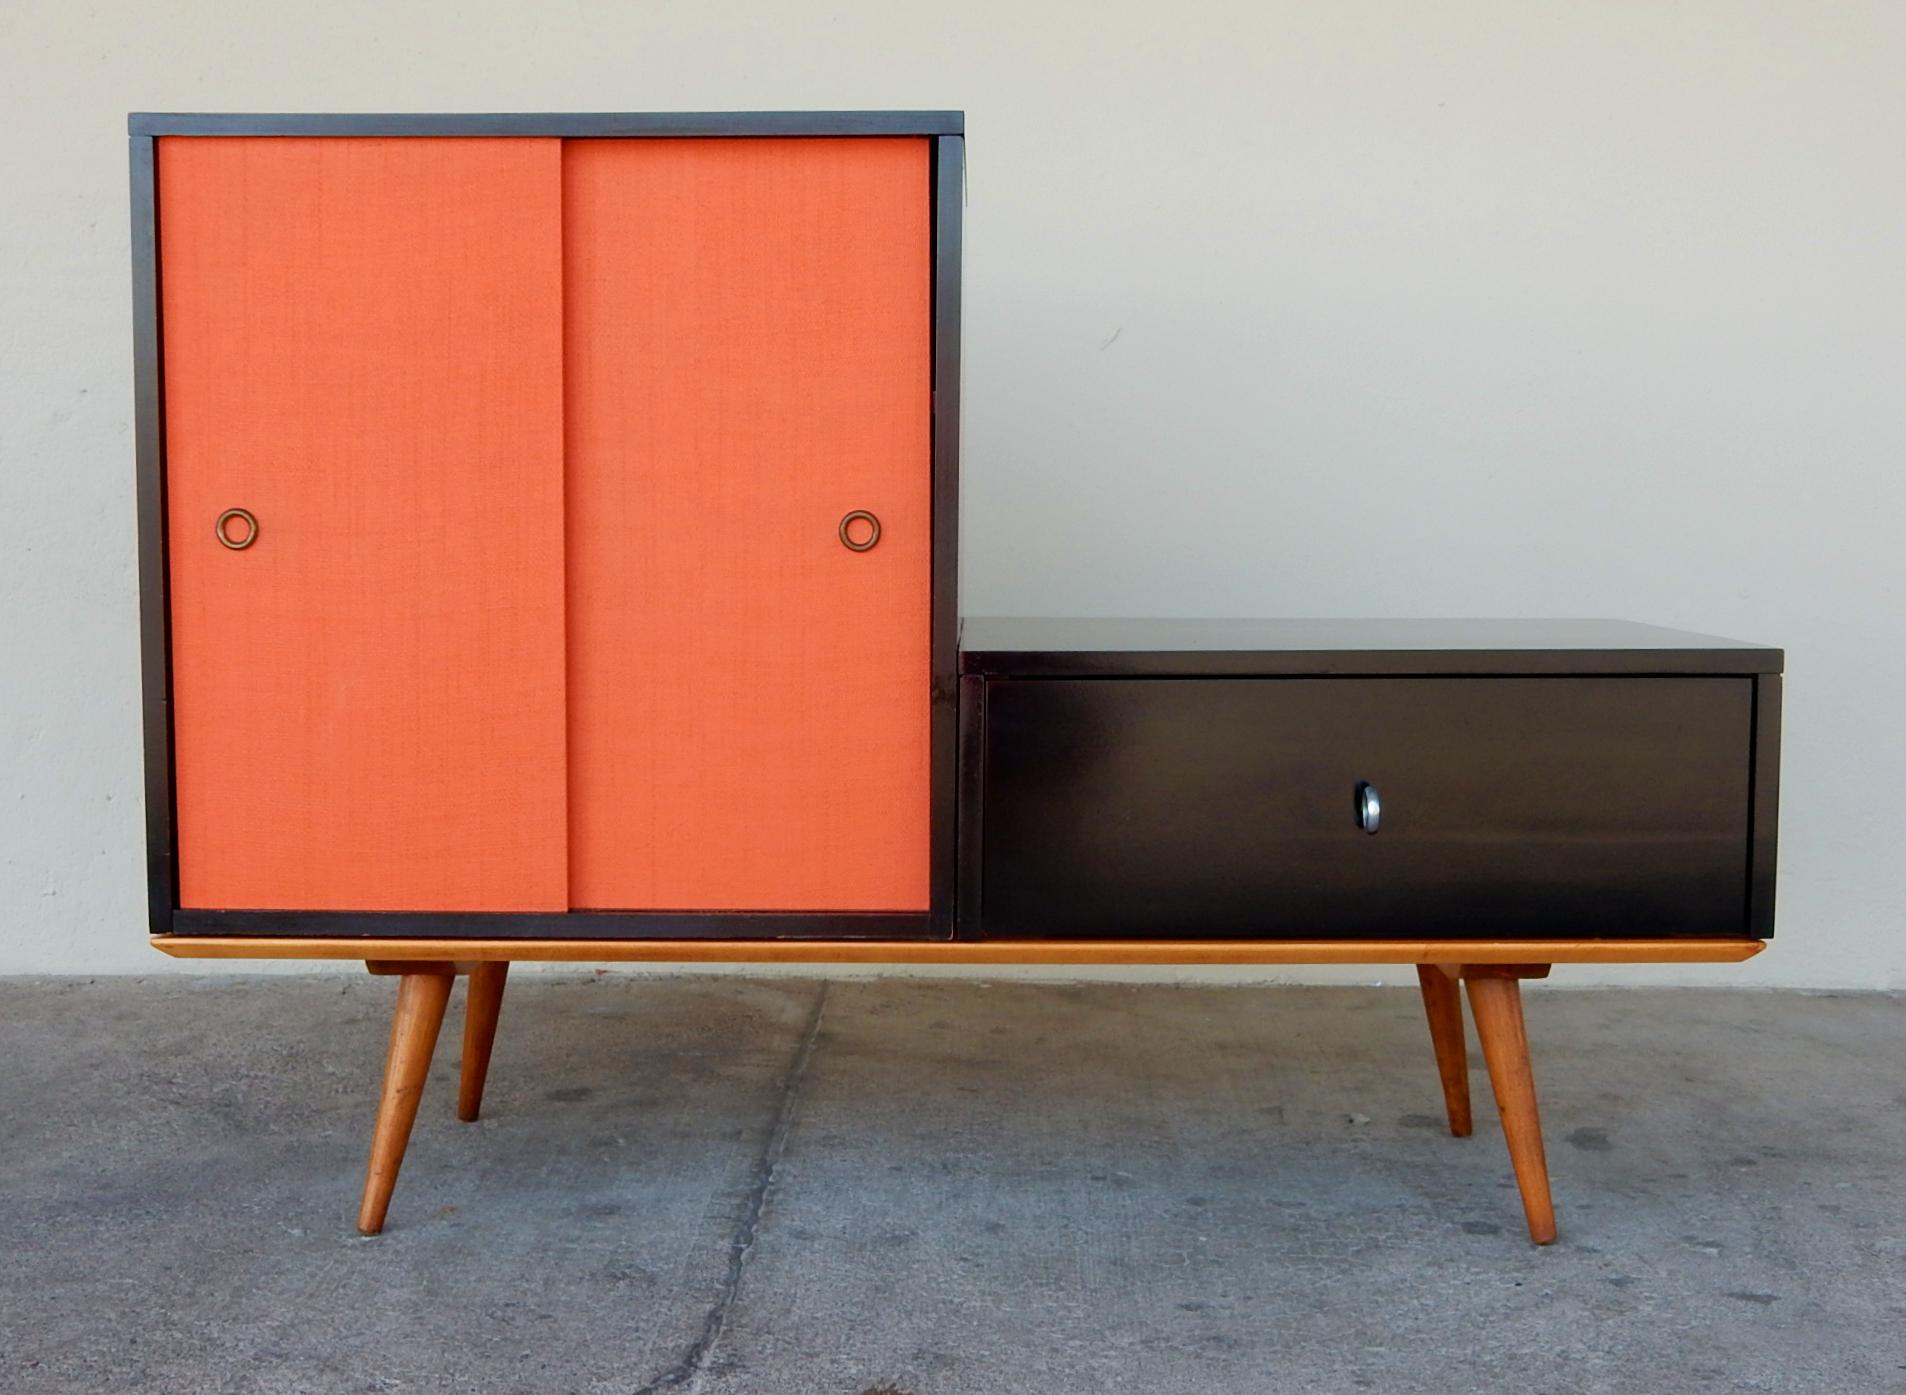 Killer midcentury modular unit!
Designed by Paul McCobb for the planner group line of Winchendon Furniture.
The color scheme is amazing!
3 pieces......natural wood low bench, a glossy black lacquer drawer box and sliding door cabinet with rare